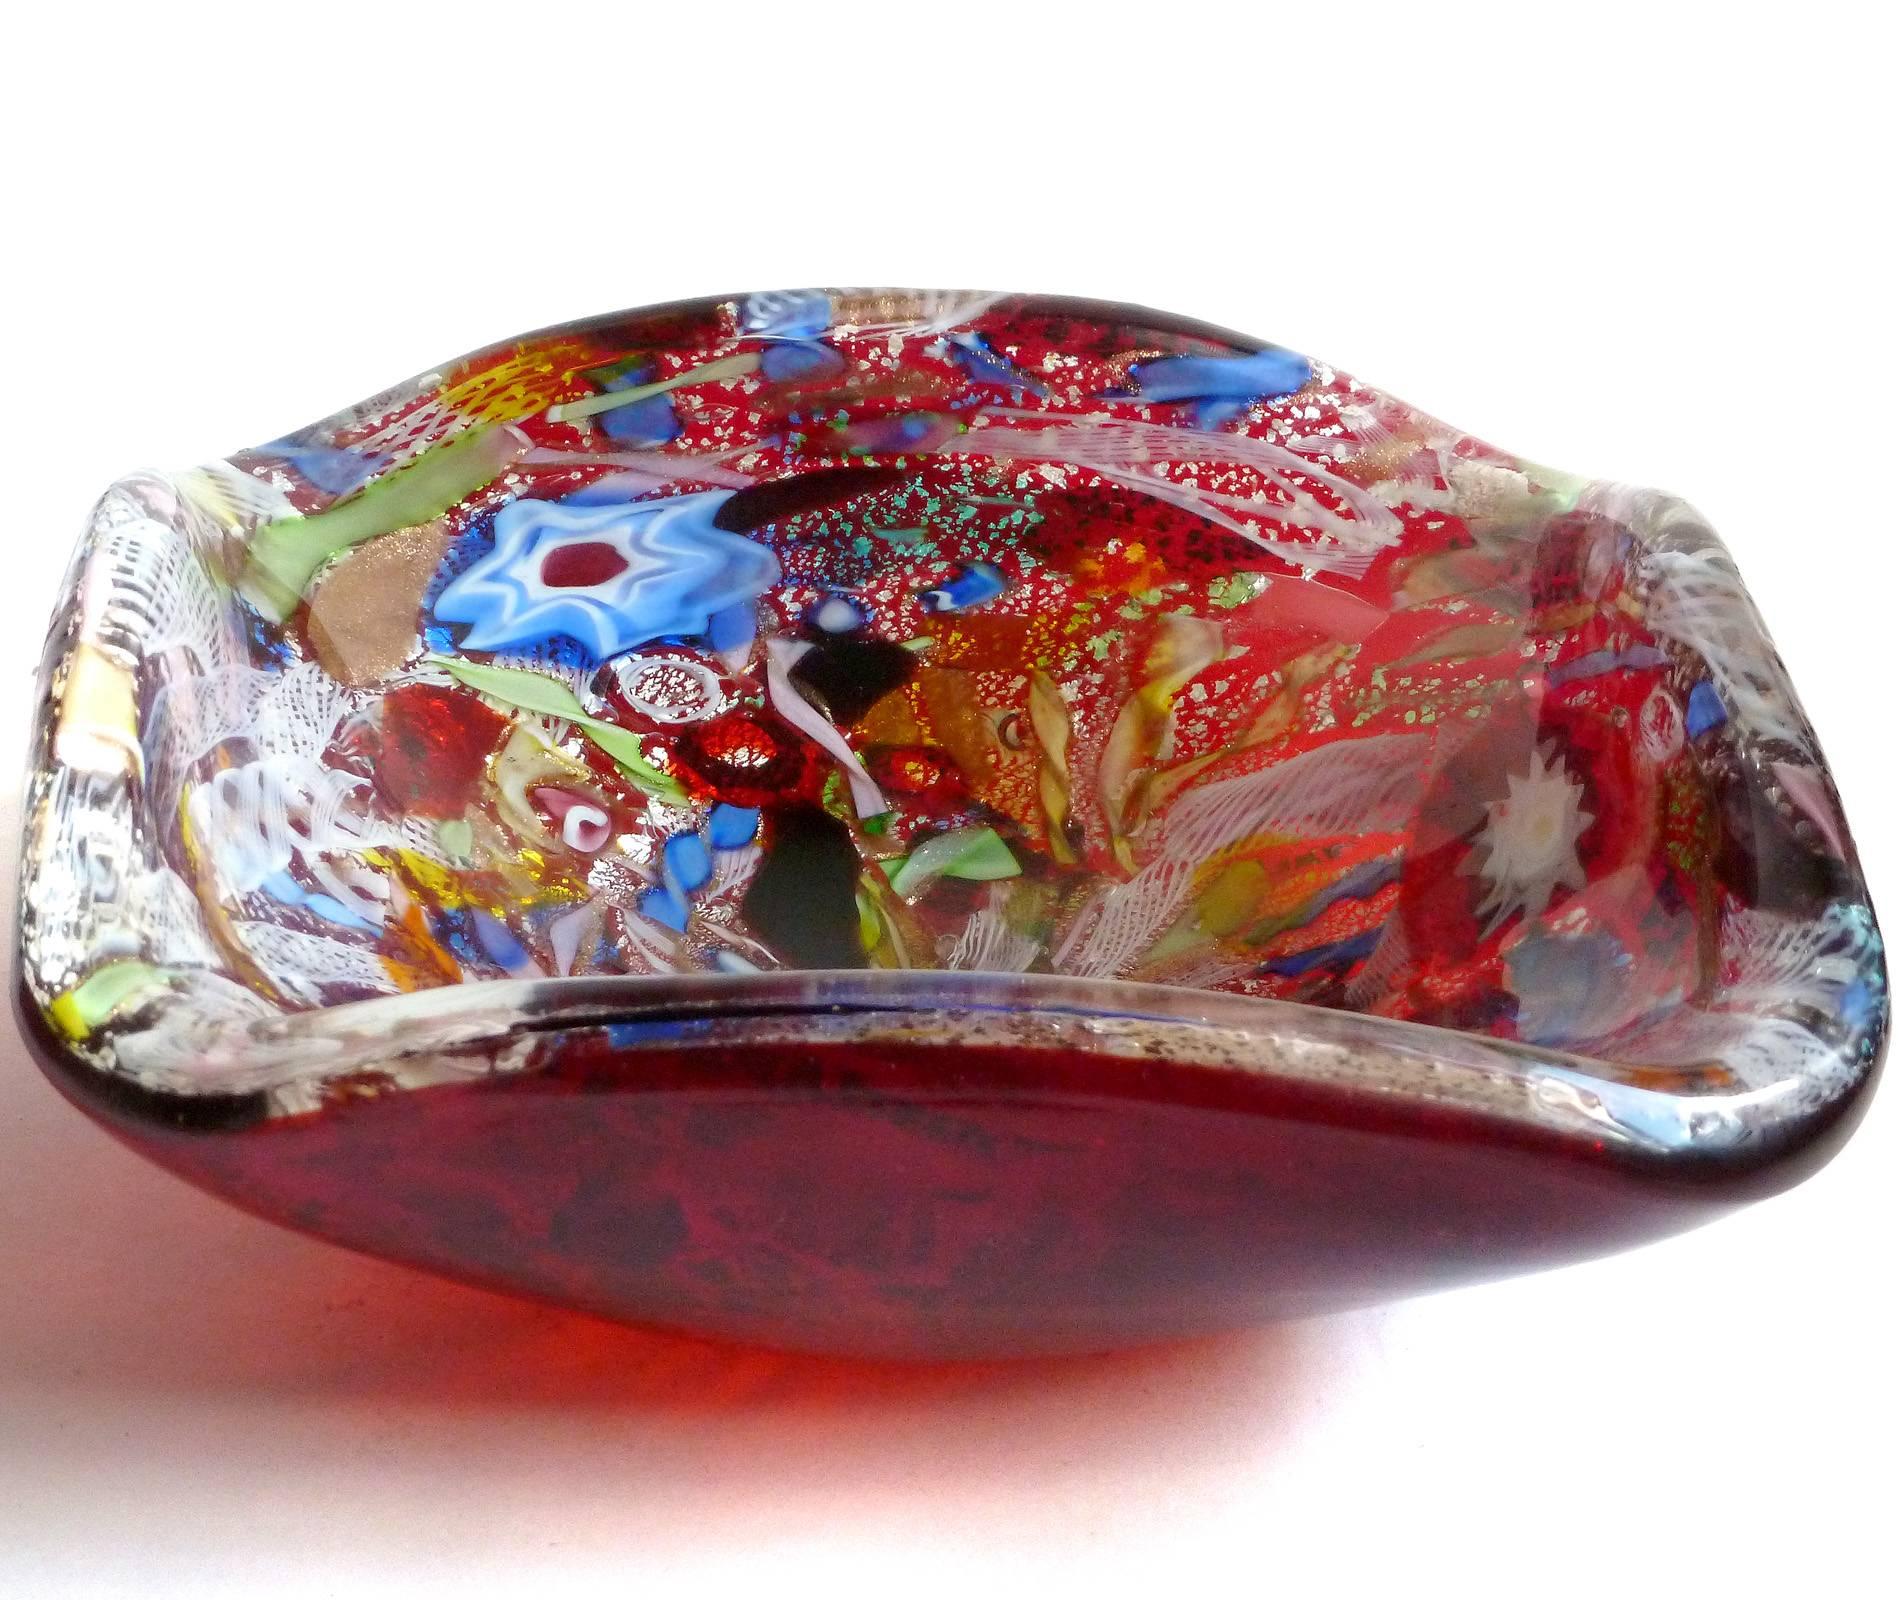 Free shipping worldwide! See details below description.

Large Murano handblown red over silver flecks, Millefiori flower canes, Zanfirico and Latticino ribbons art glass bowl. Documented to the Arte Vetreria Muranese (A.Ve.M.) company, and